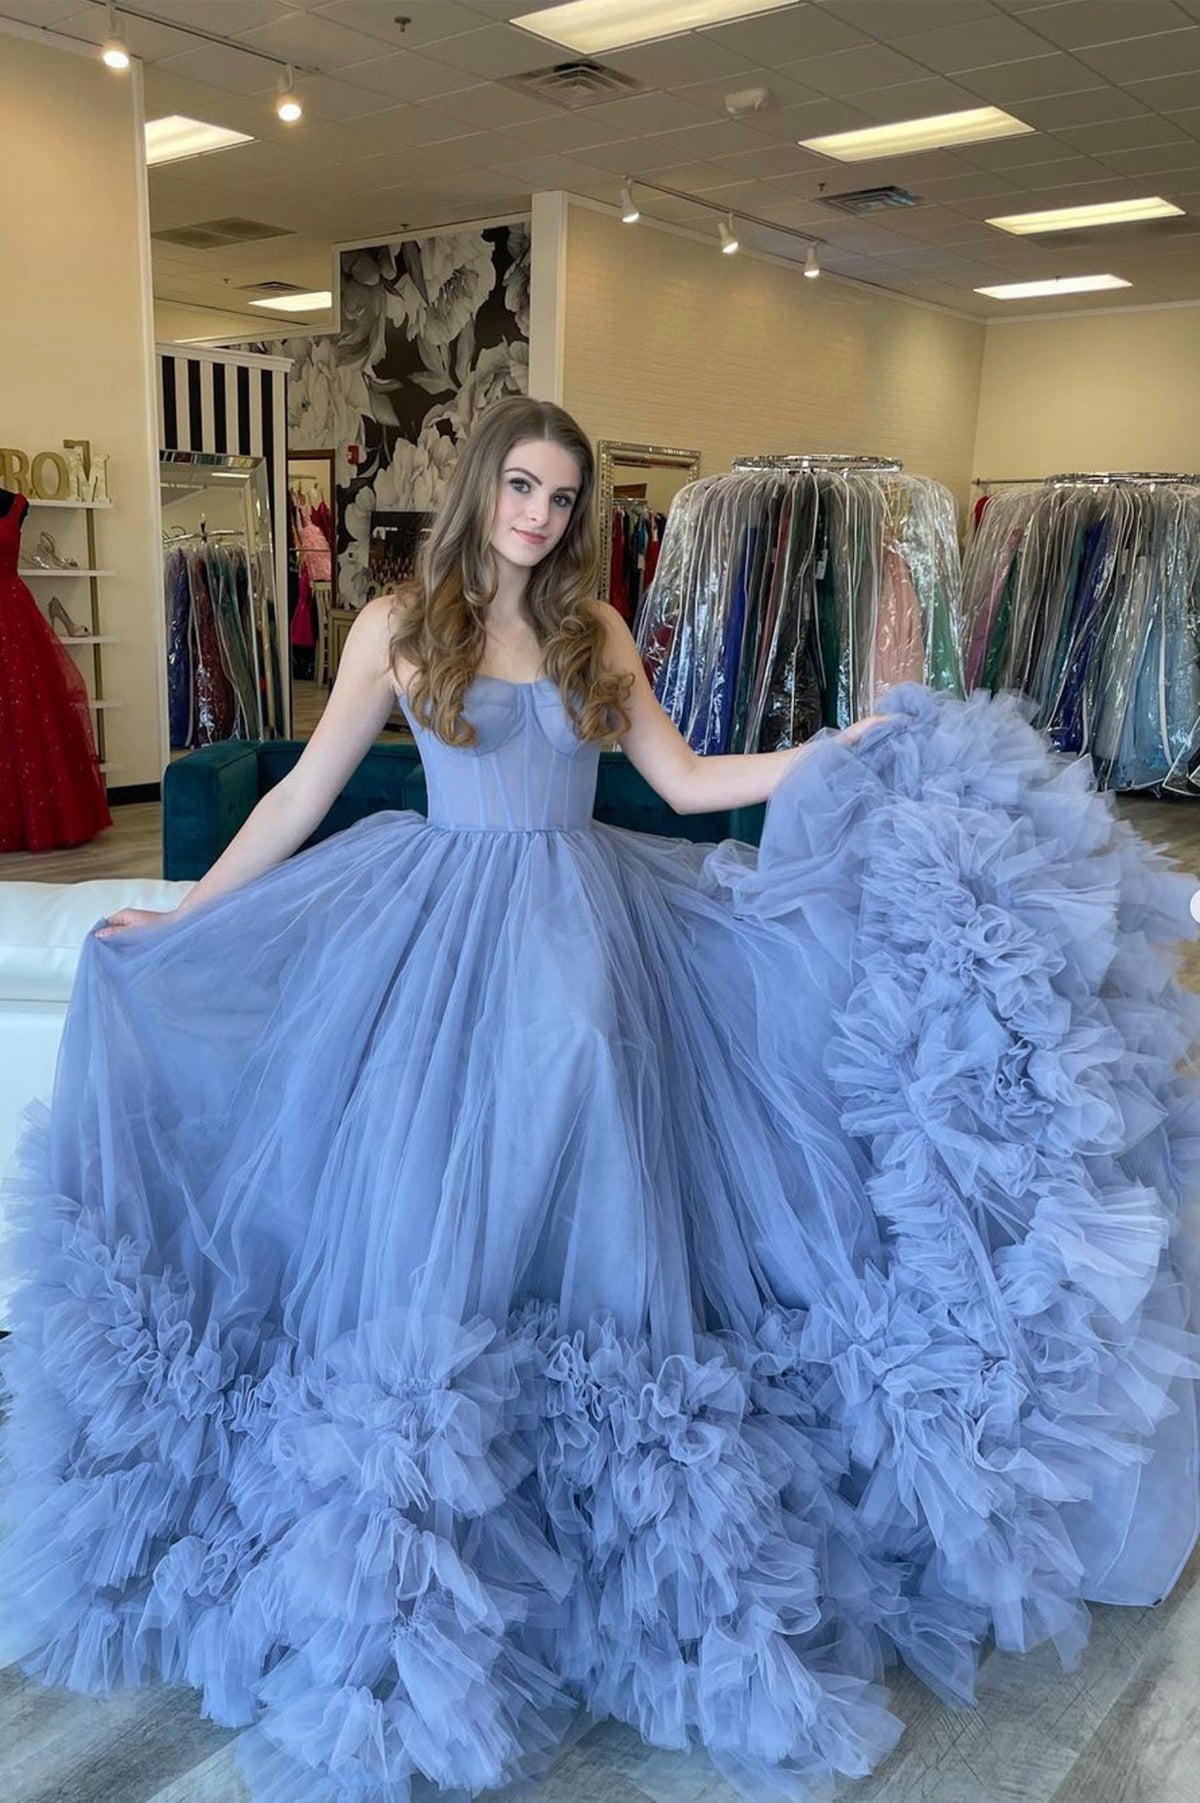 Blue Strapless Tulle Long Prom Dress, A-Line Evening Party Dress